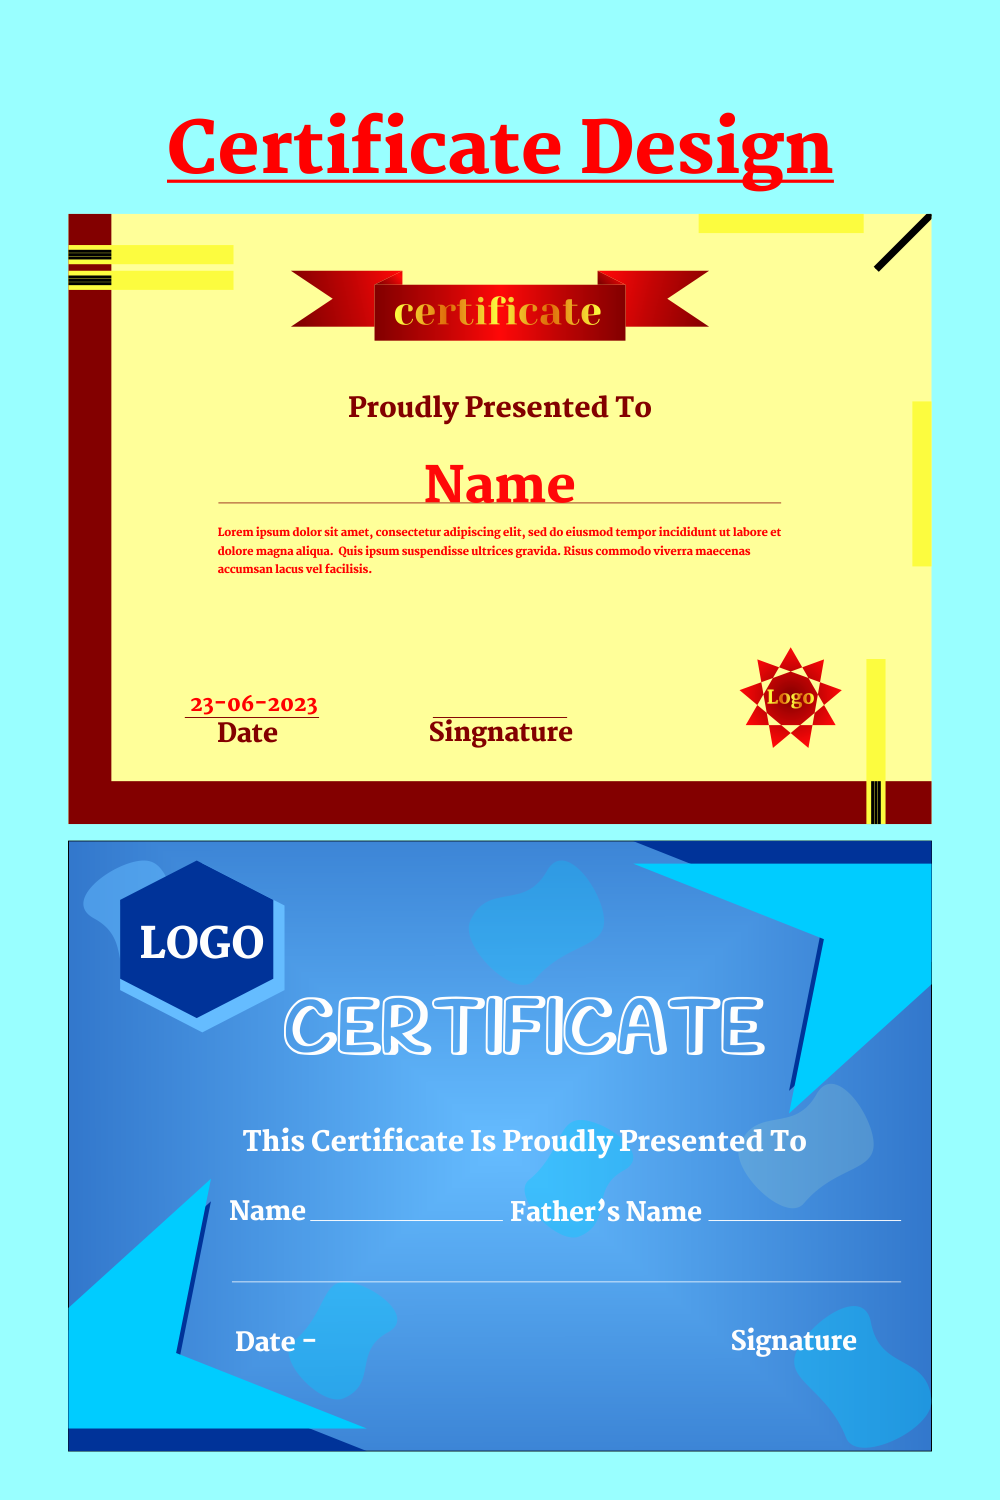 Certificate Design pinterest preview image.